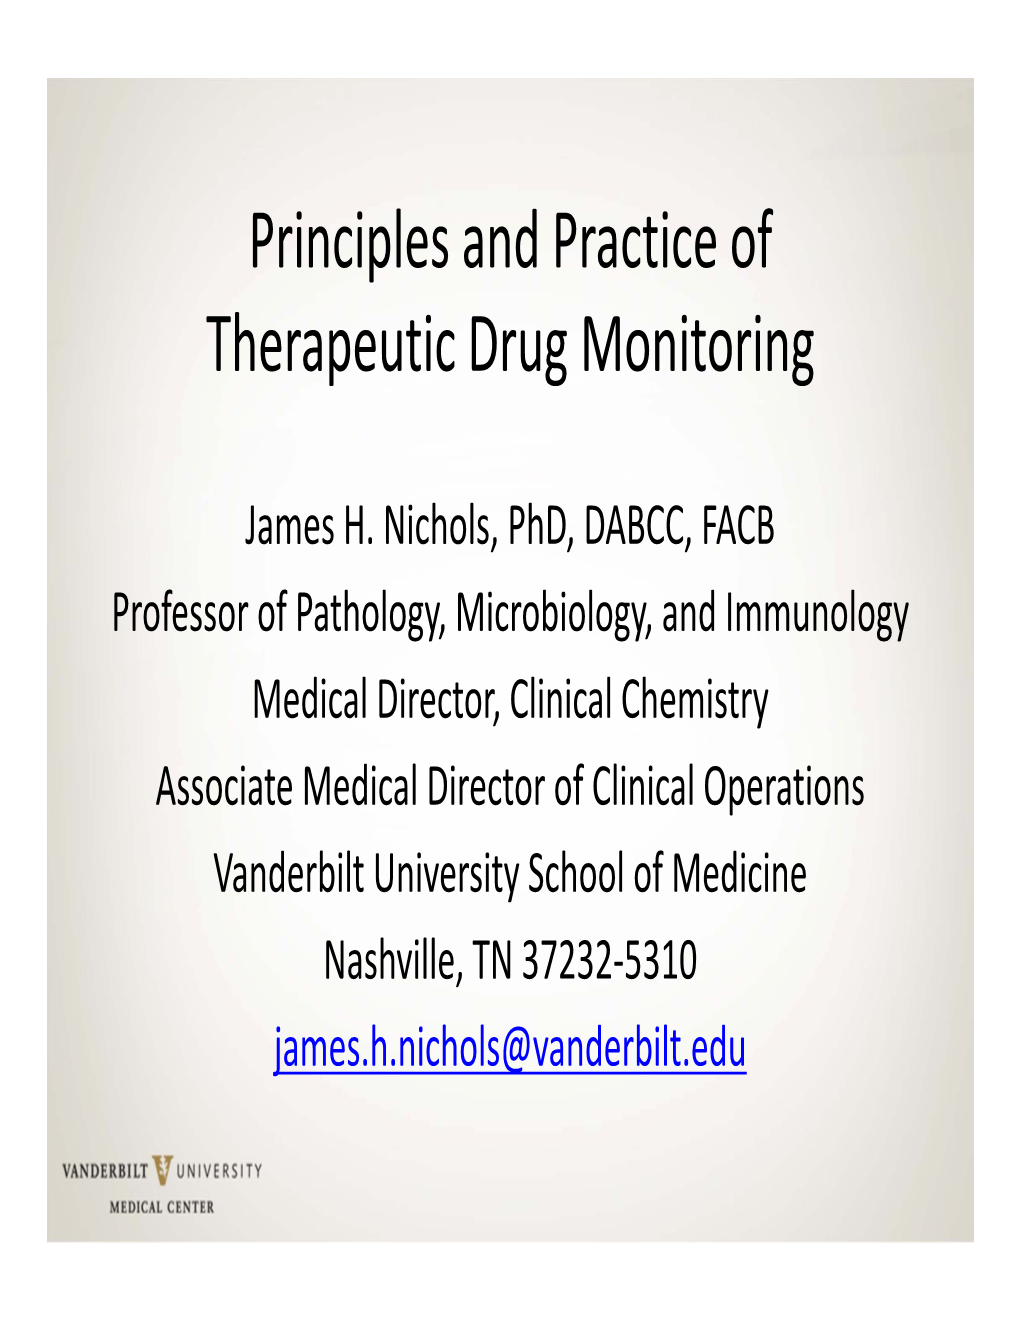 Principles and Practice of Therapeutic Drug Monitoring